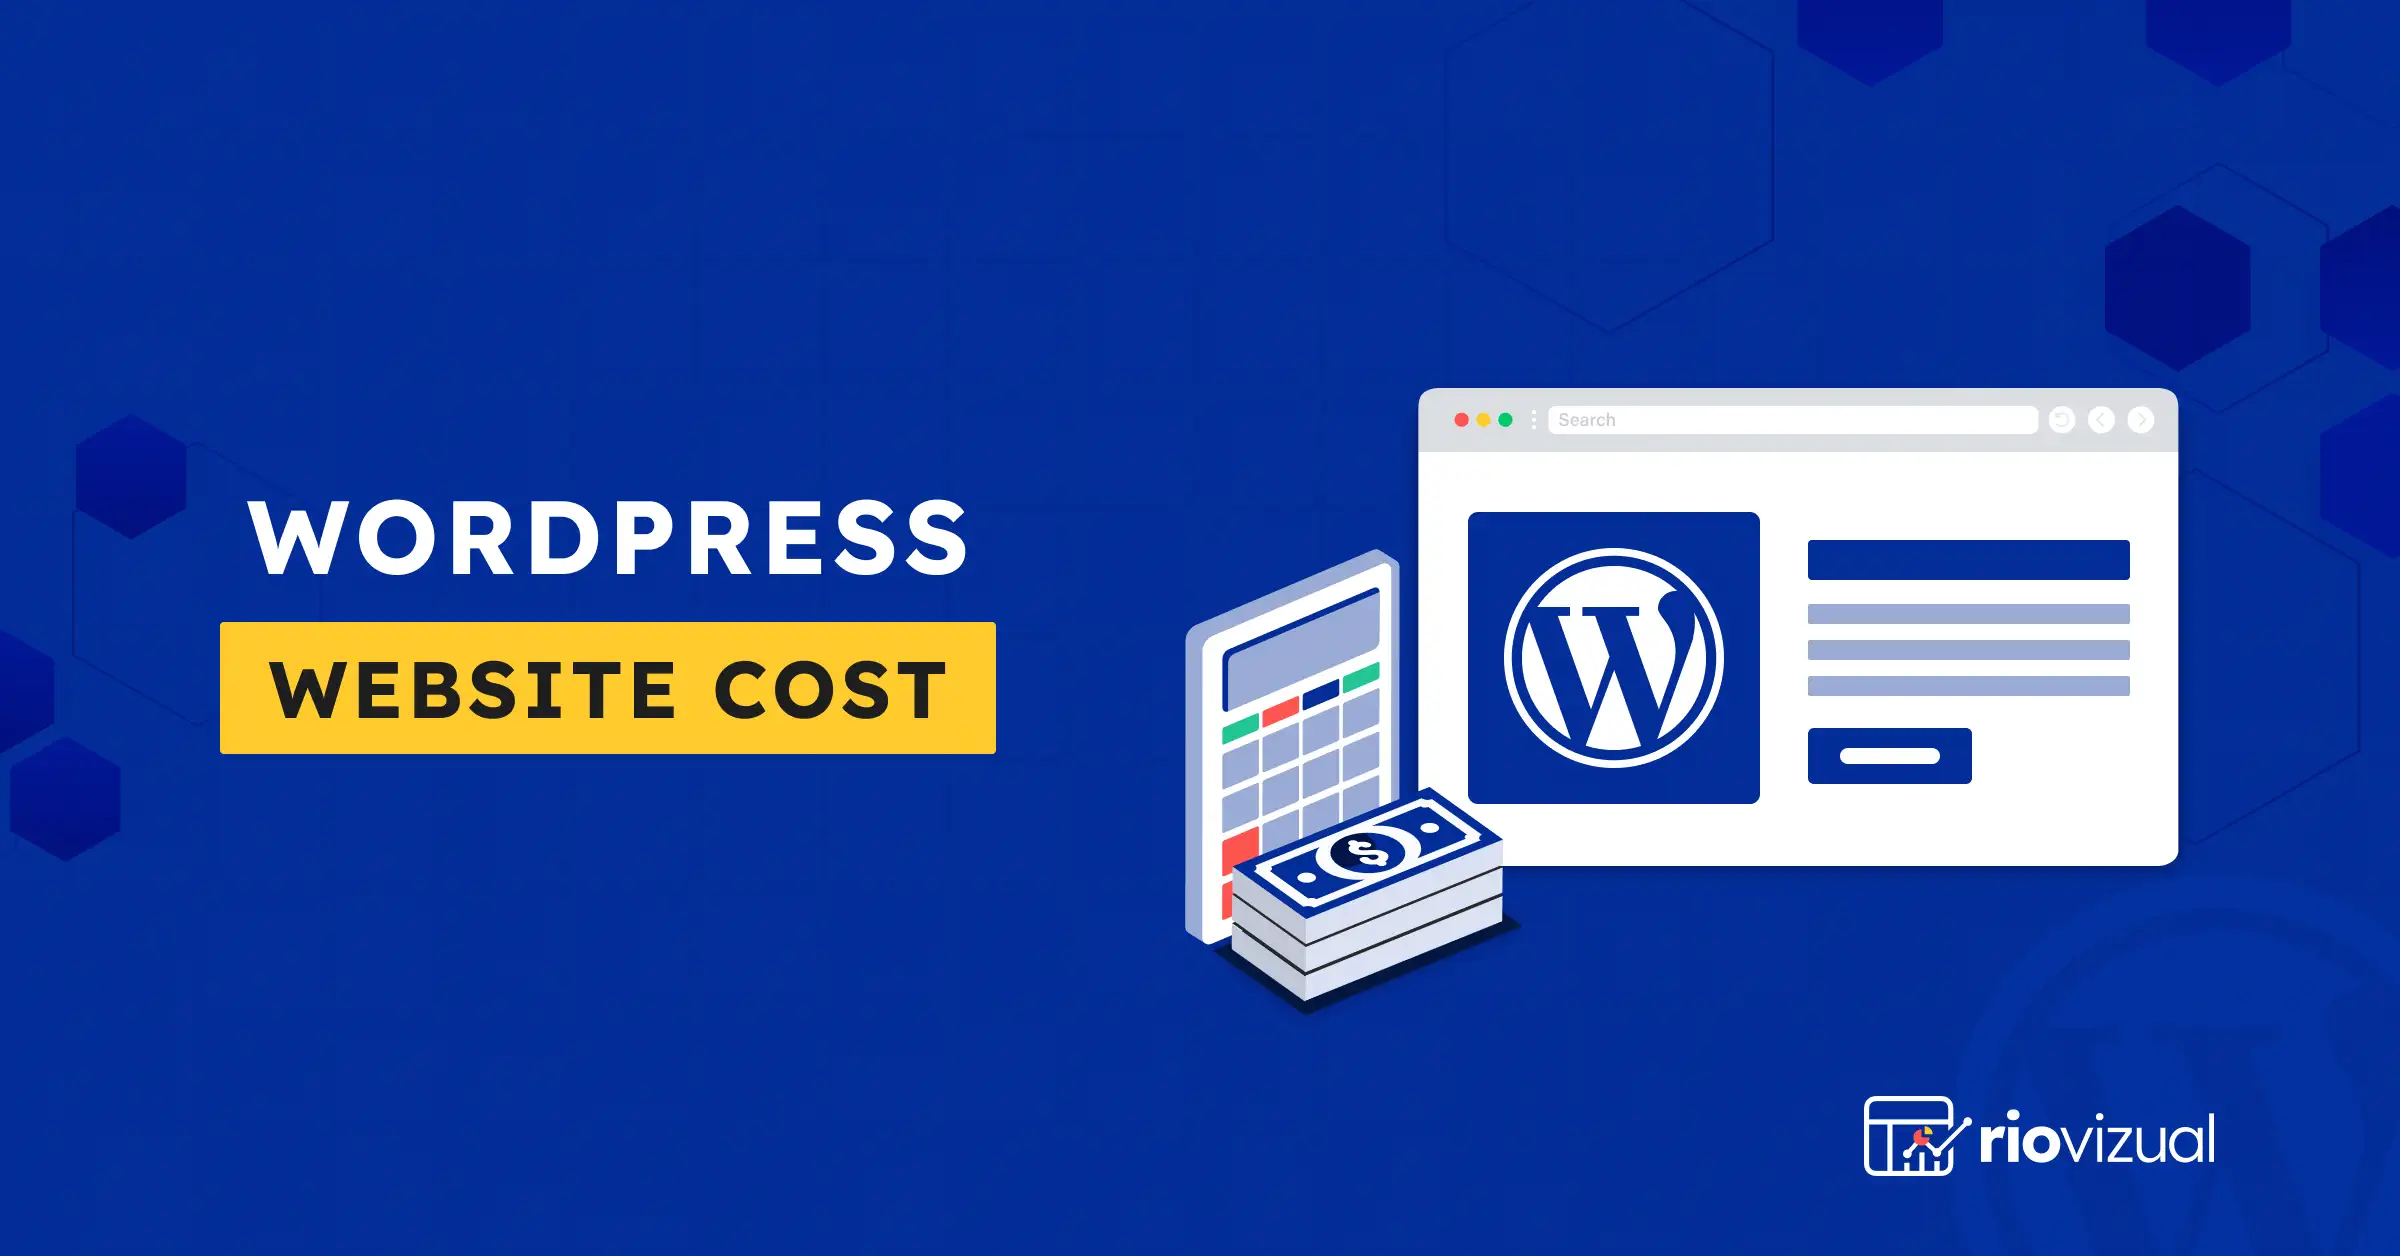 How Much Does A WordPress Website Cost?